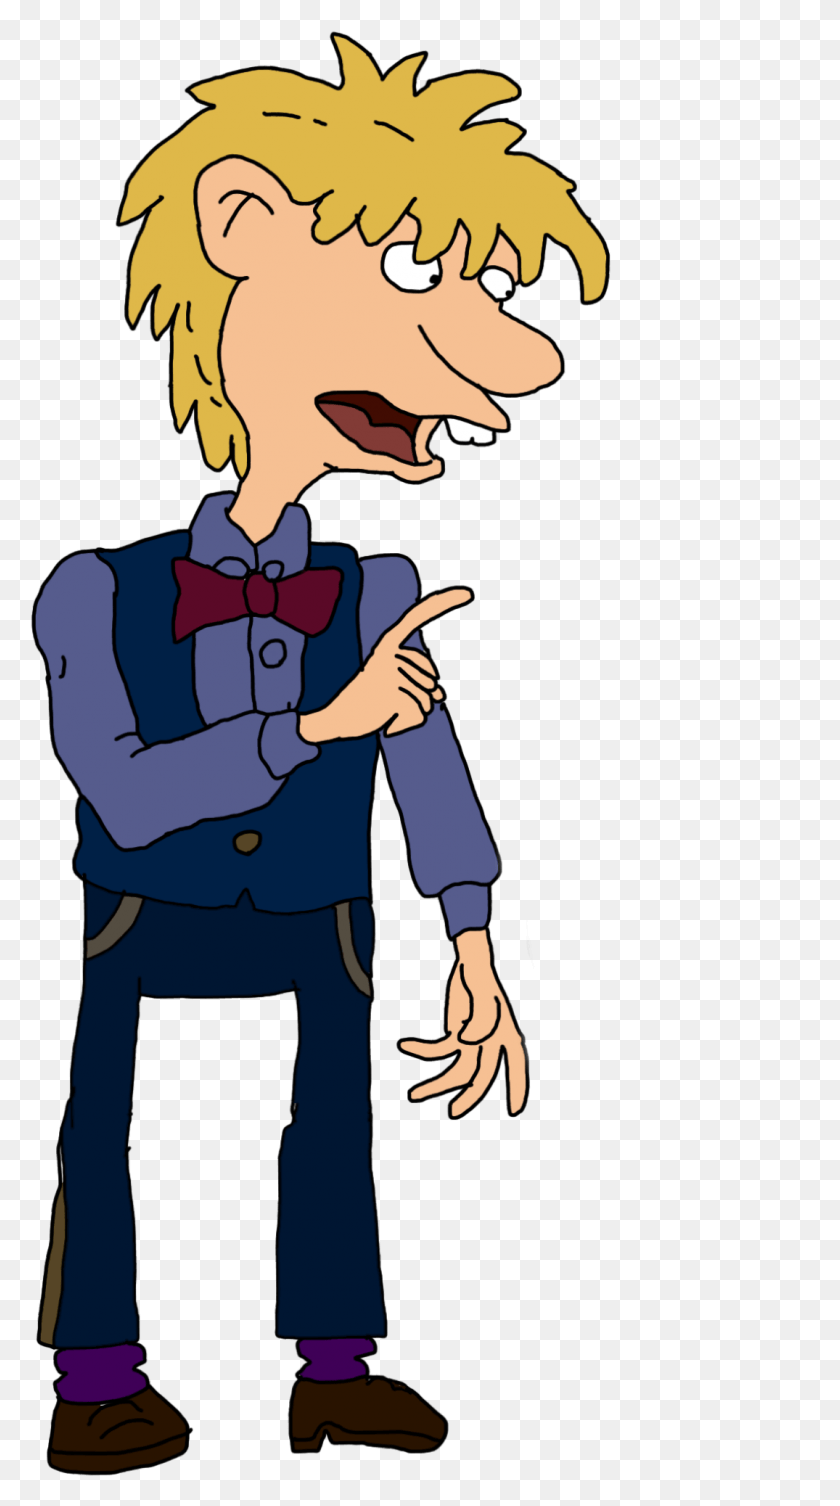 1075x1993 Descargar Png Larry Rugrats Wiki Fandom Powered Wikia Rugrats Larry And Steve Gallery, Persona, Humano, Artista Hd Png